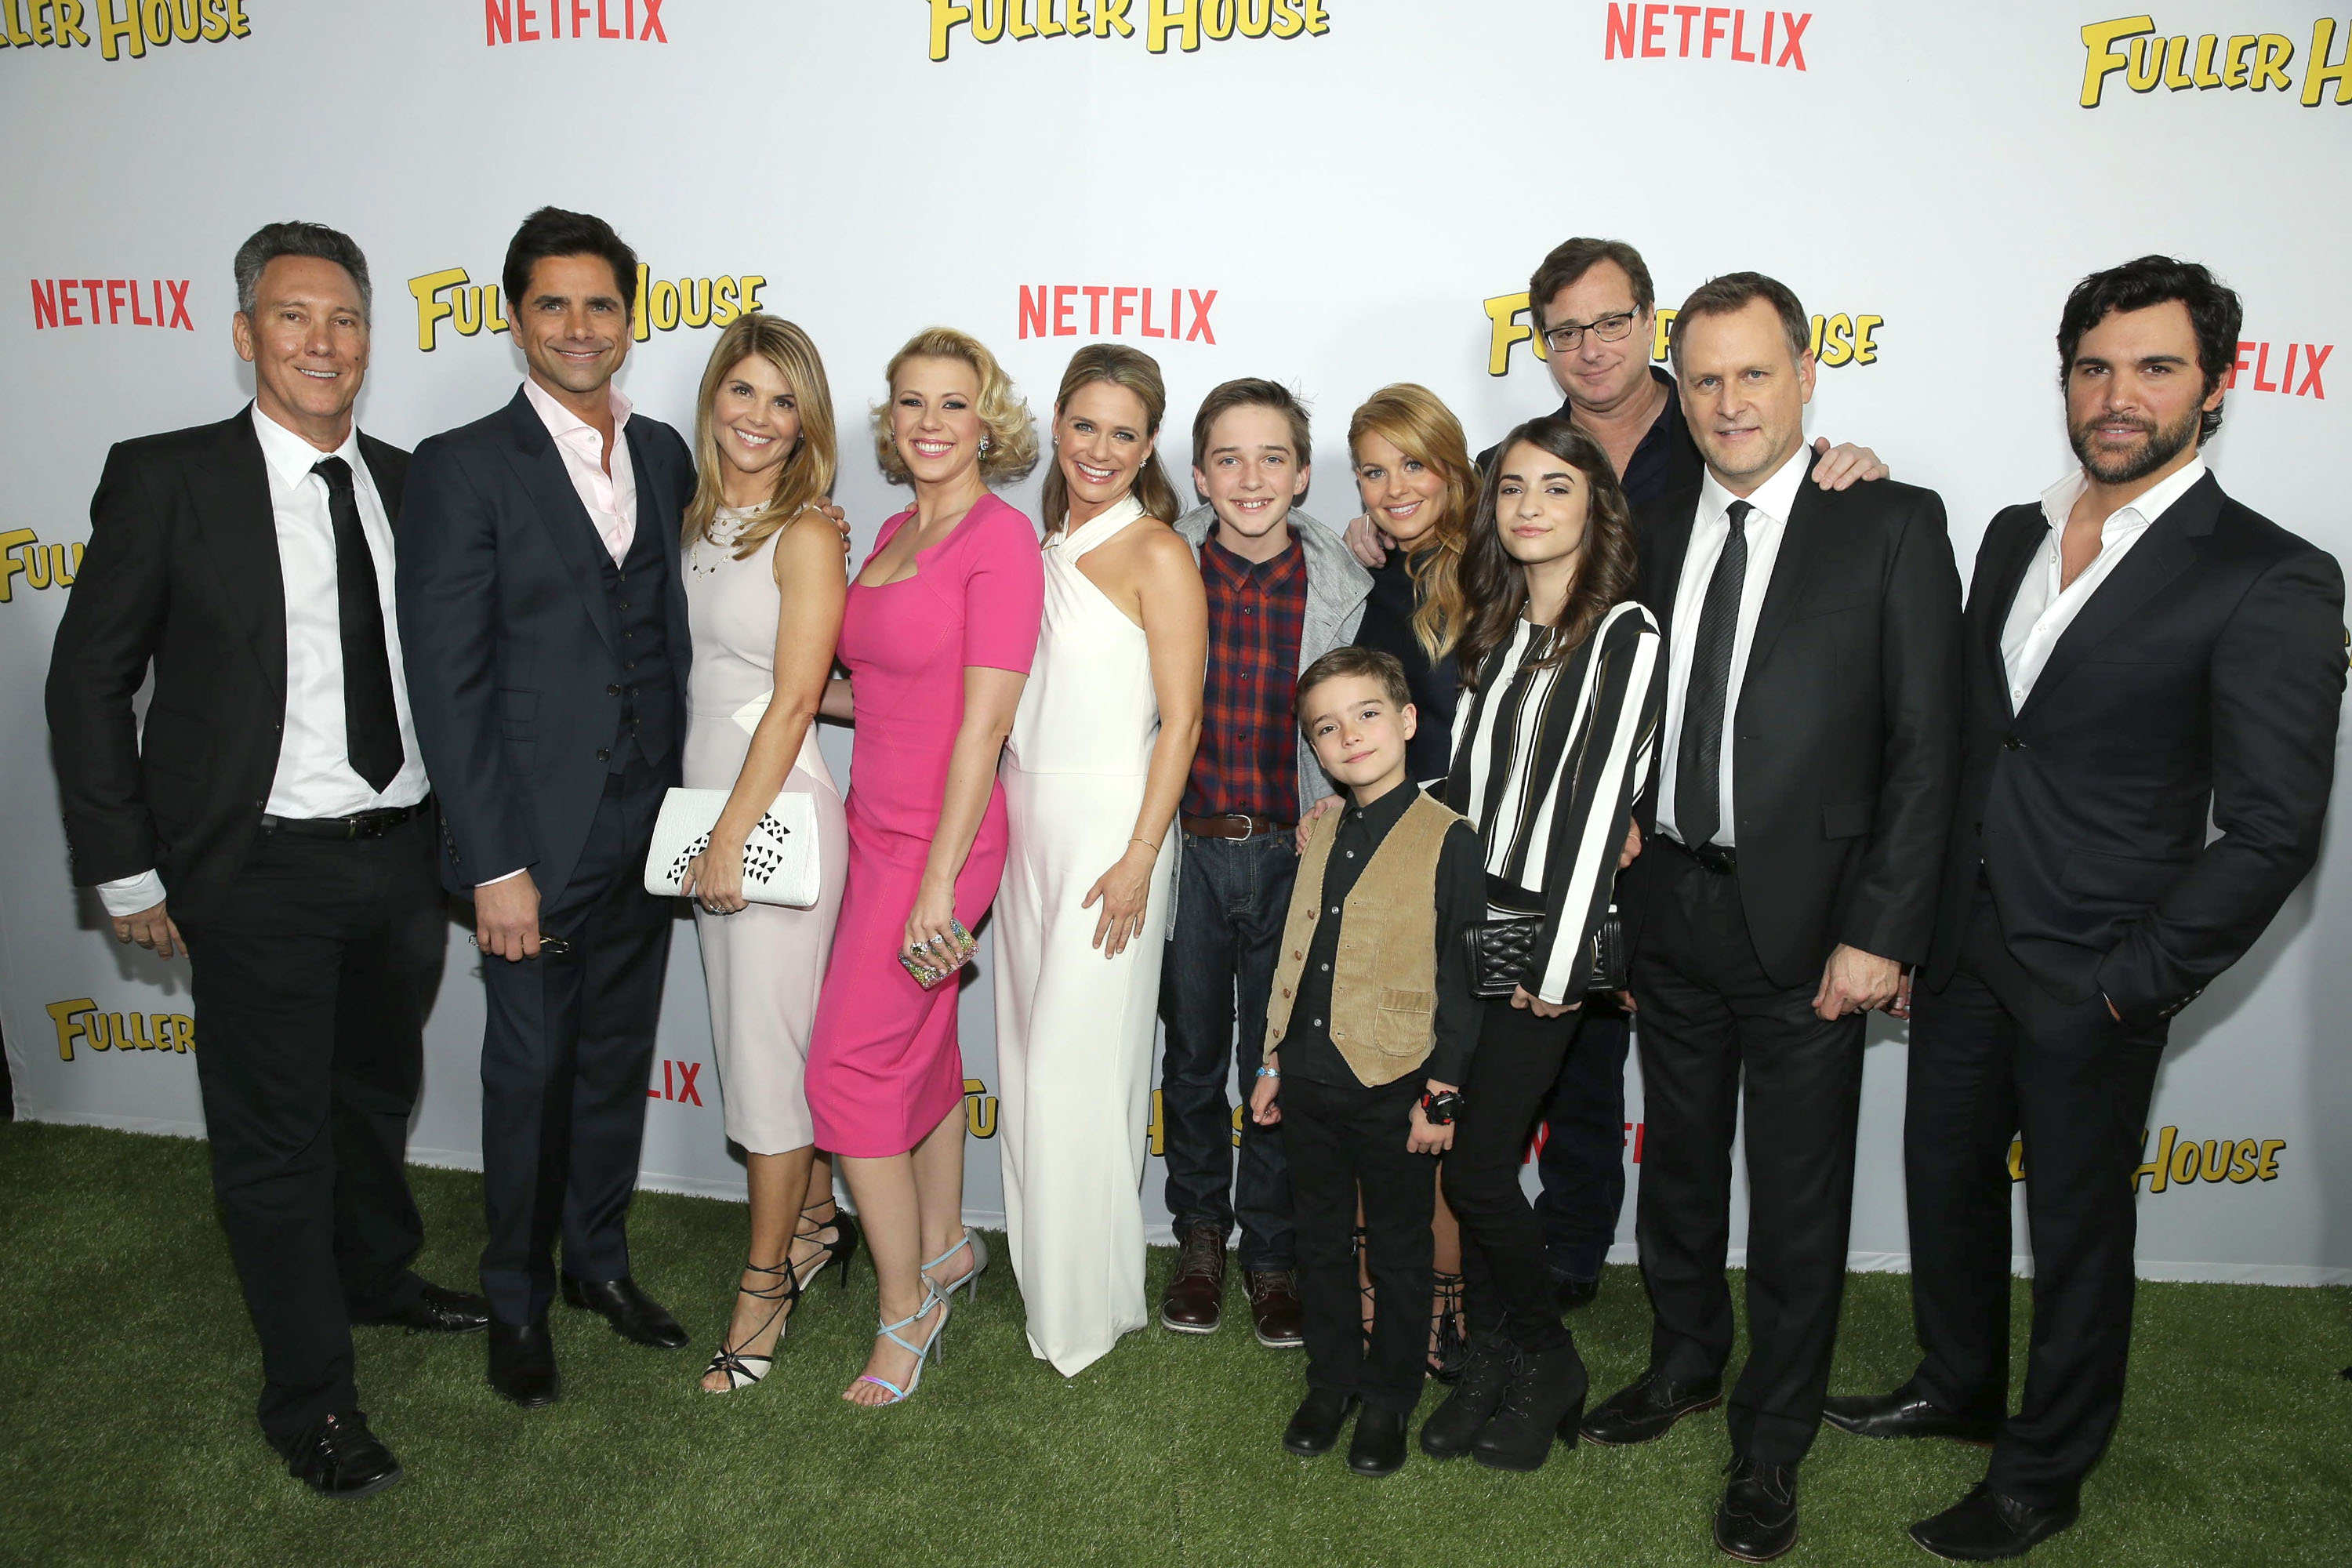 Where are they now? Catching up with the cast of ‘Fuller House’